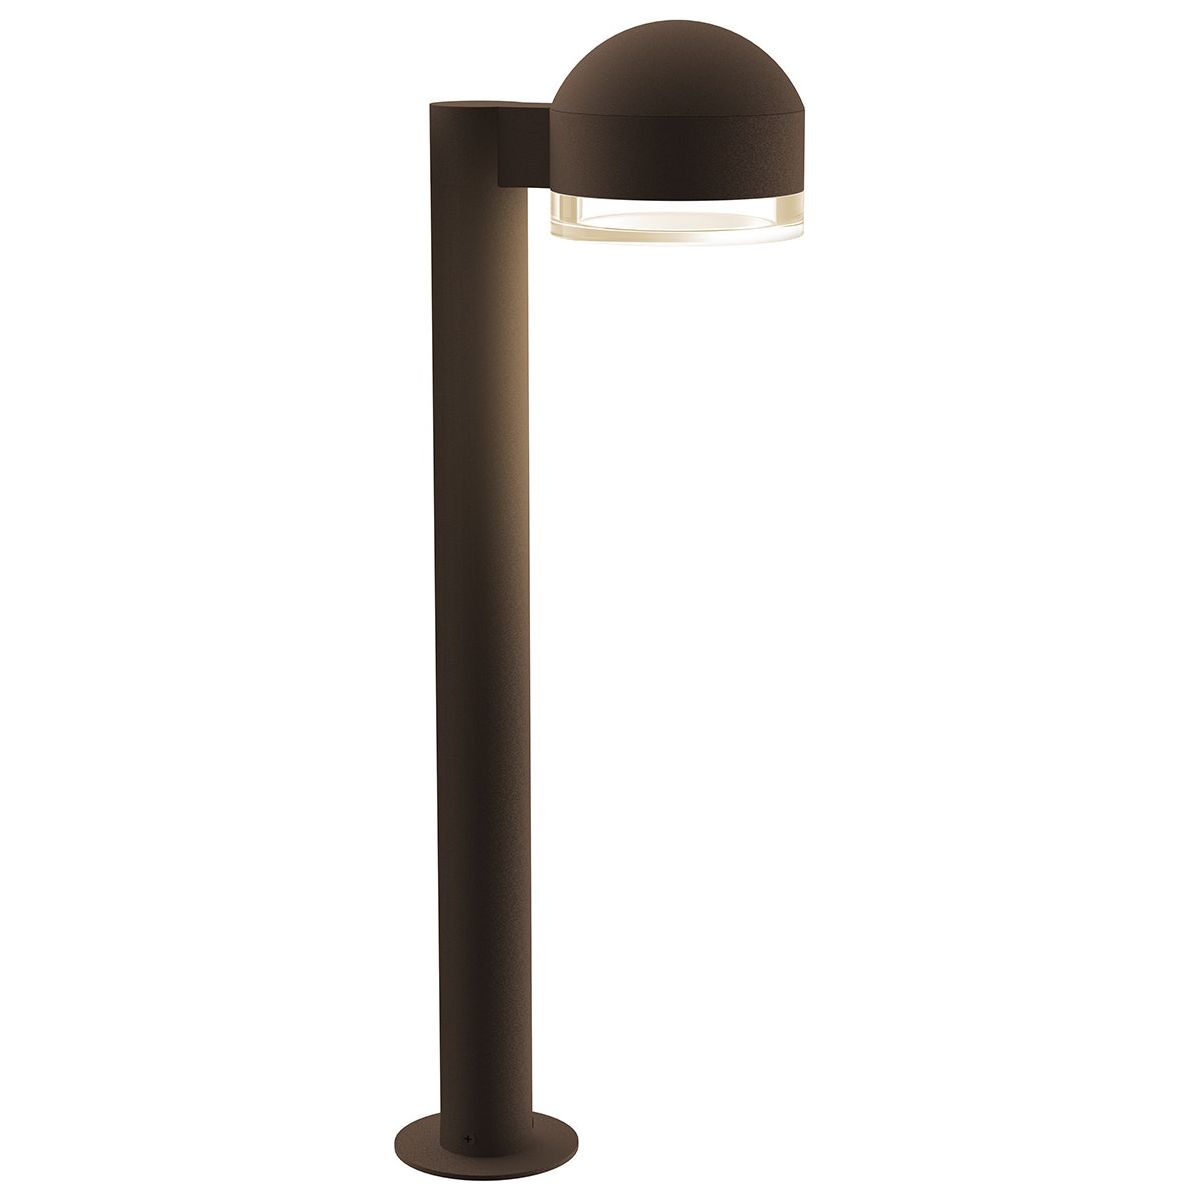 REALS 22" LED Bollard with Dome Cap and Cylinder Lens